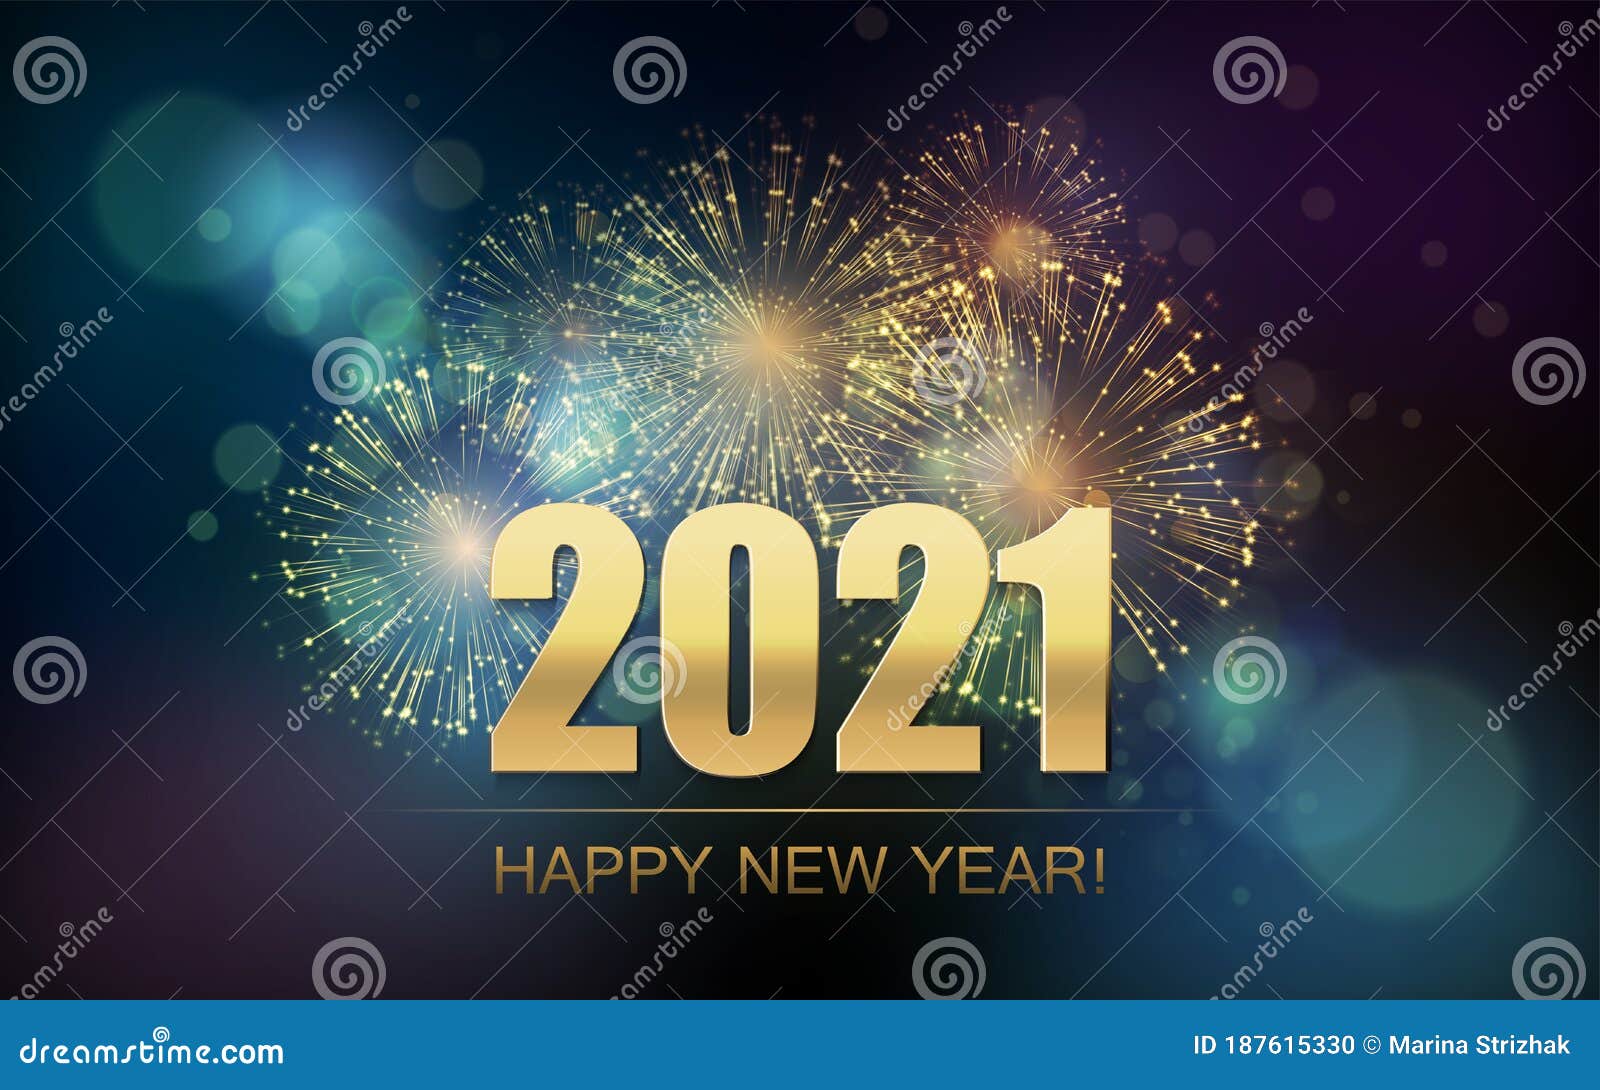 britni young recommends happy new year 2021 flashing images pic